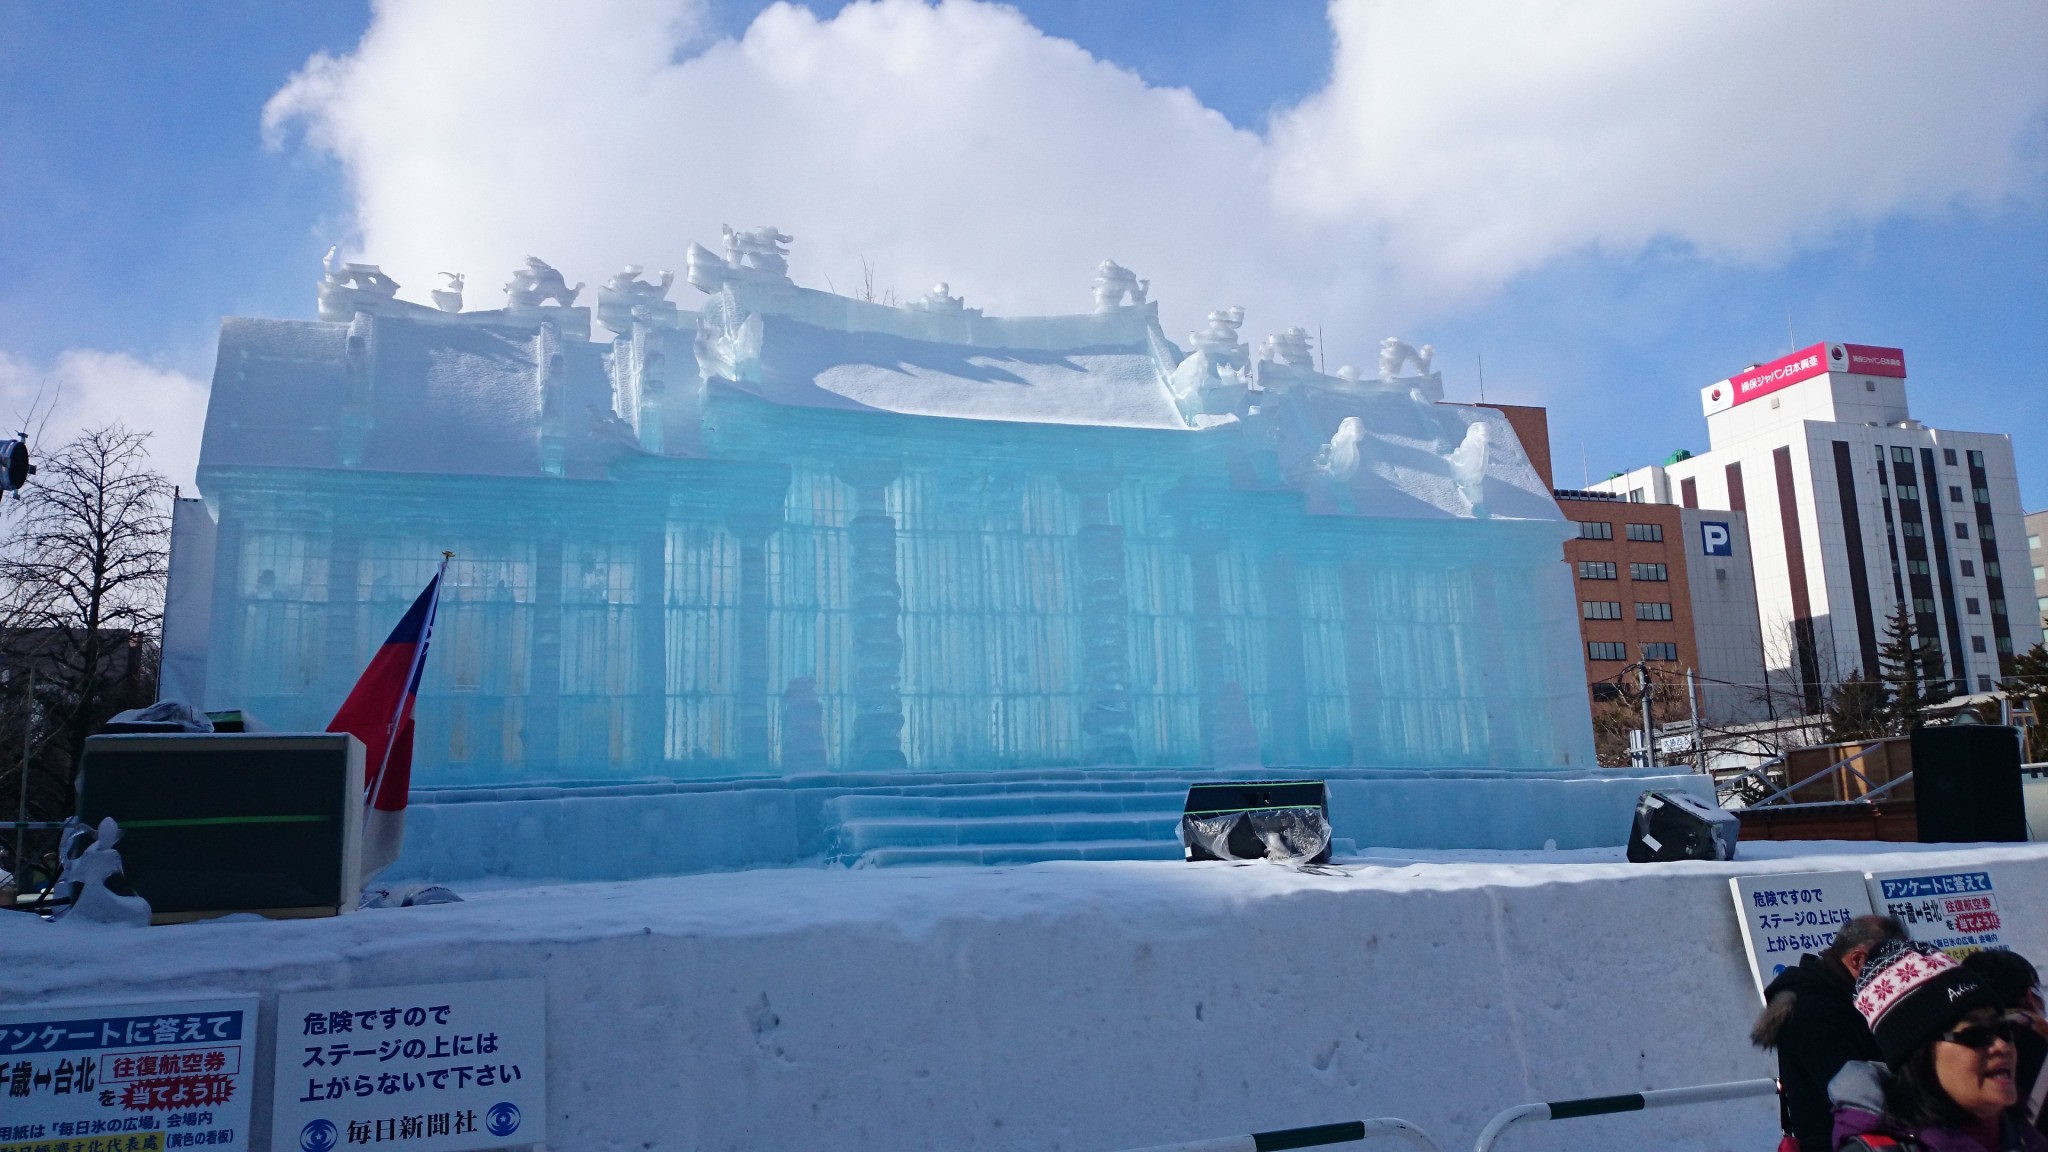 Snow and Ice as far as your eyes can see at Sapporo Snow Festival